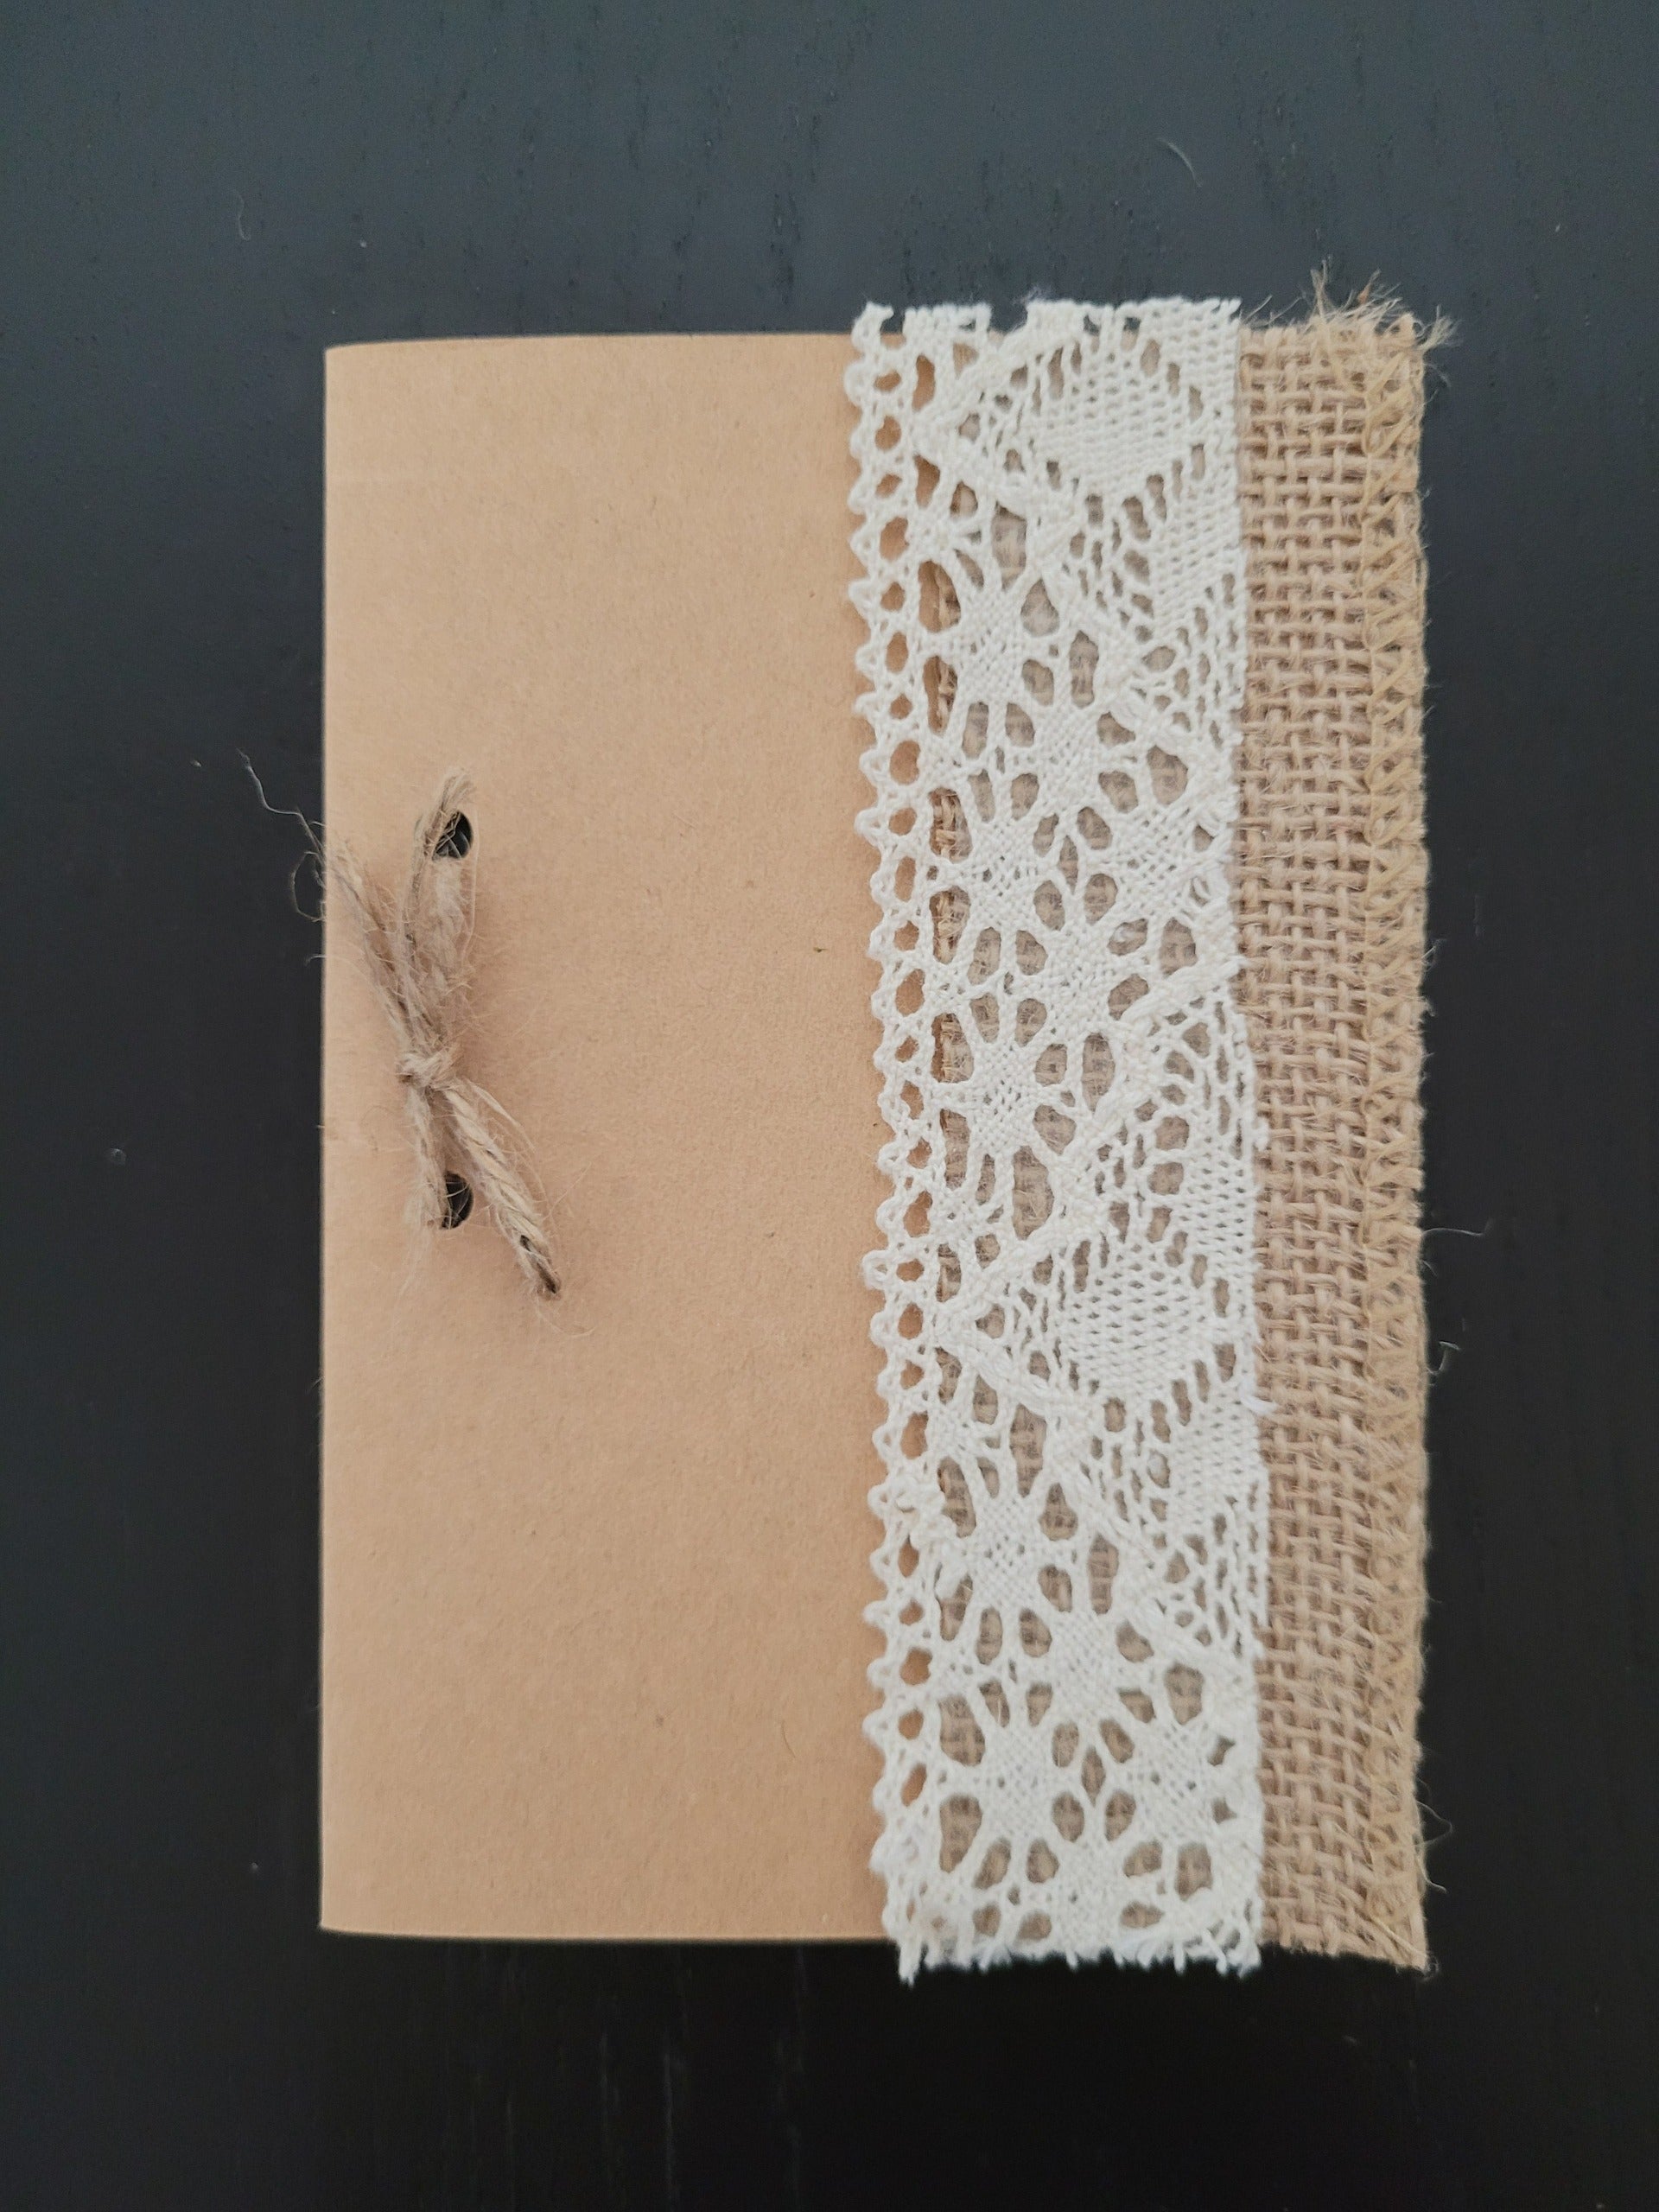 Handmade message card with lace and burlap